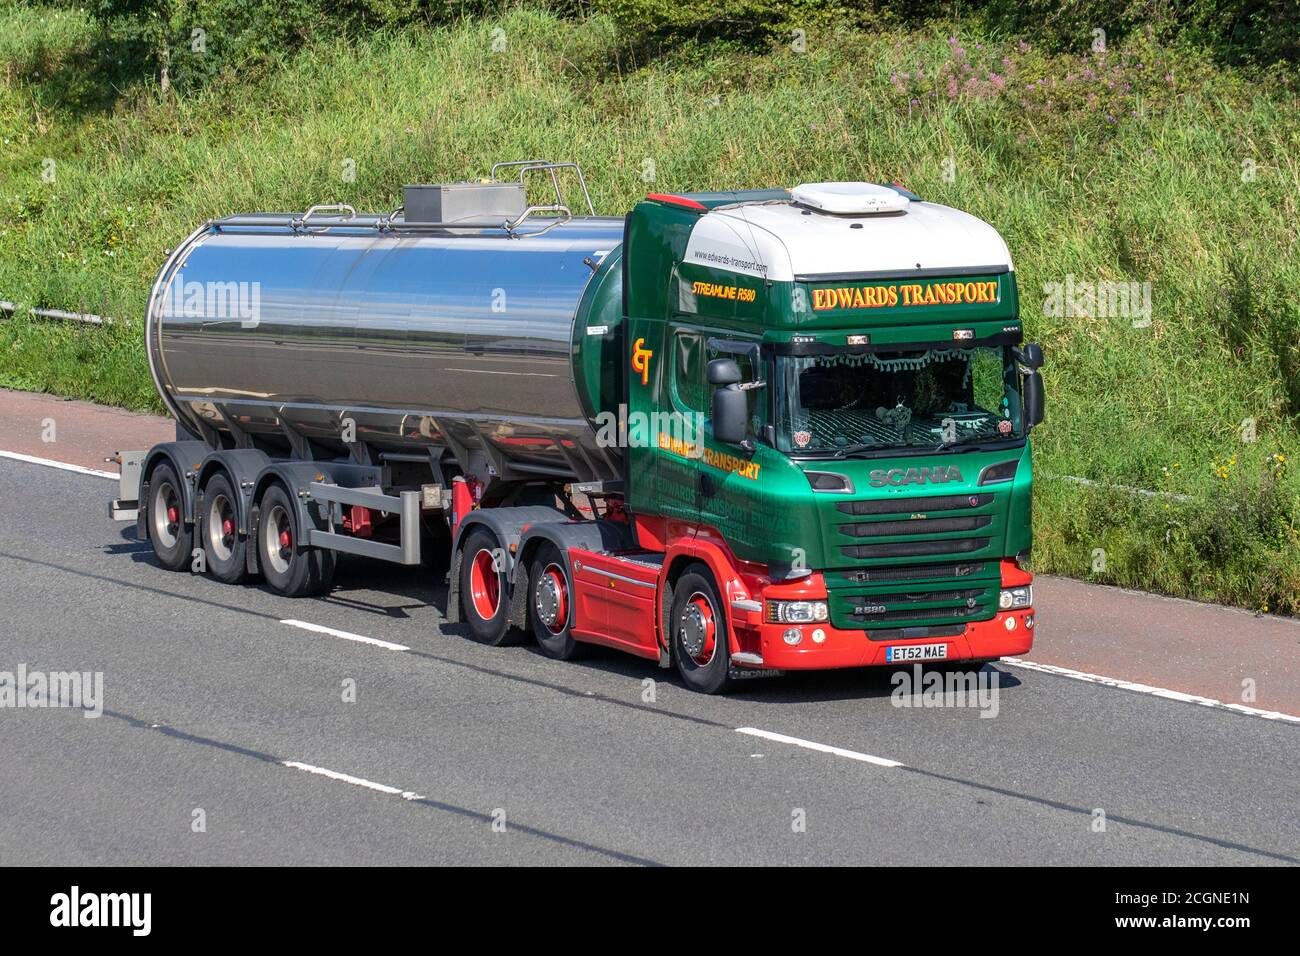 Edwards Transport green Haulage delivery trucks, tanker lorry, transportation, truck, bulk liquid milk tankers, food cargo carrier, Scania Streamline R580 vehicle, European commercial transport industry HGV, M6 at Manchester, UK Stock Photo